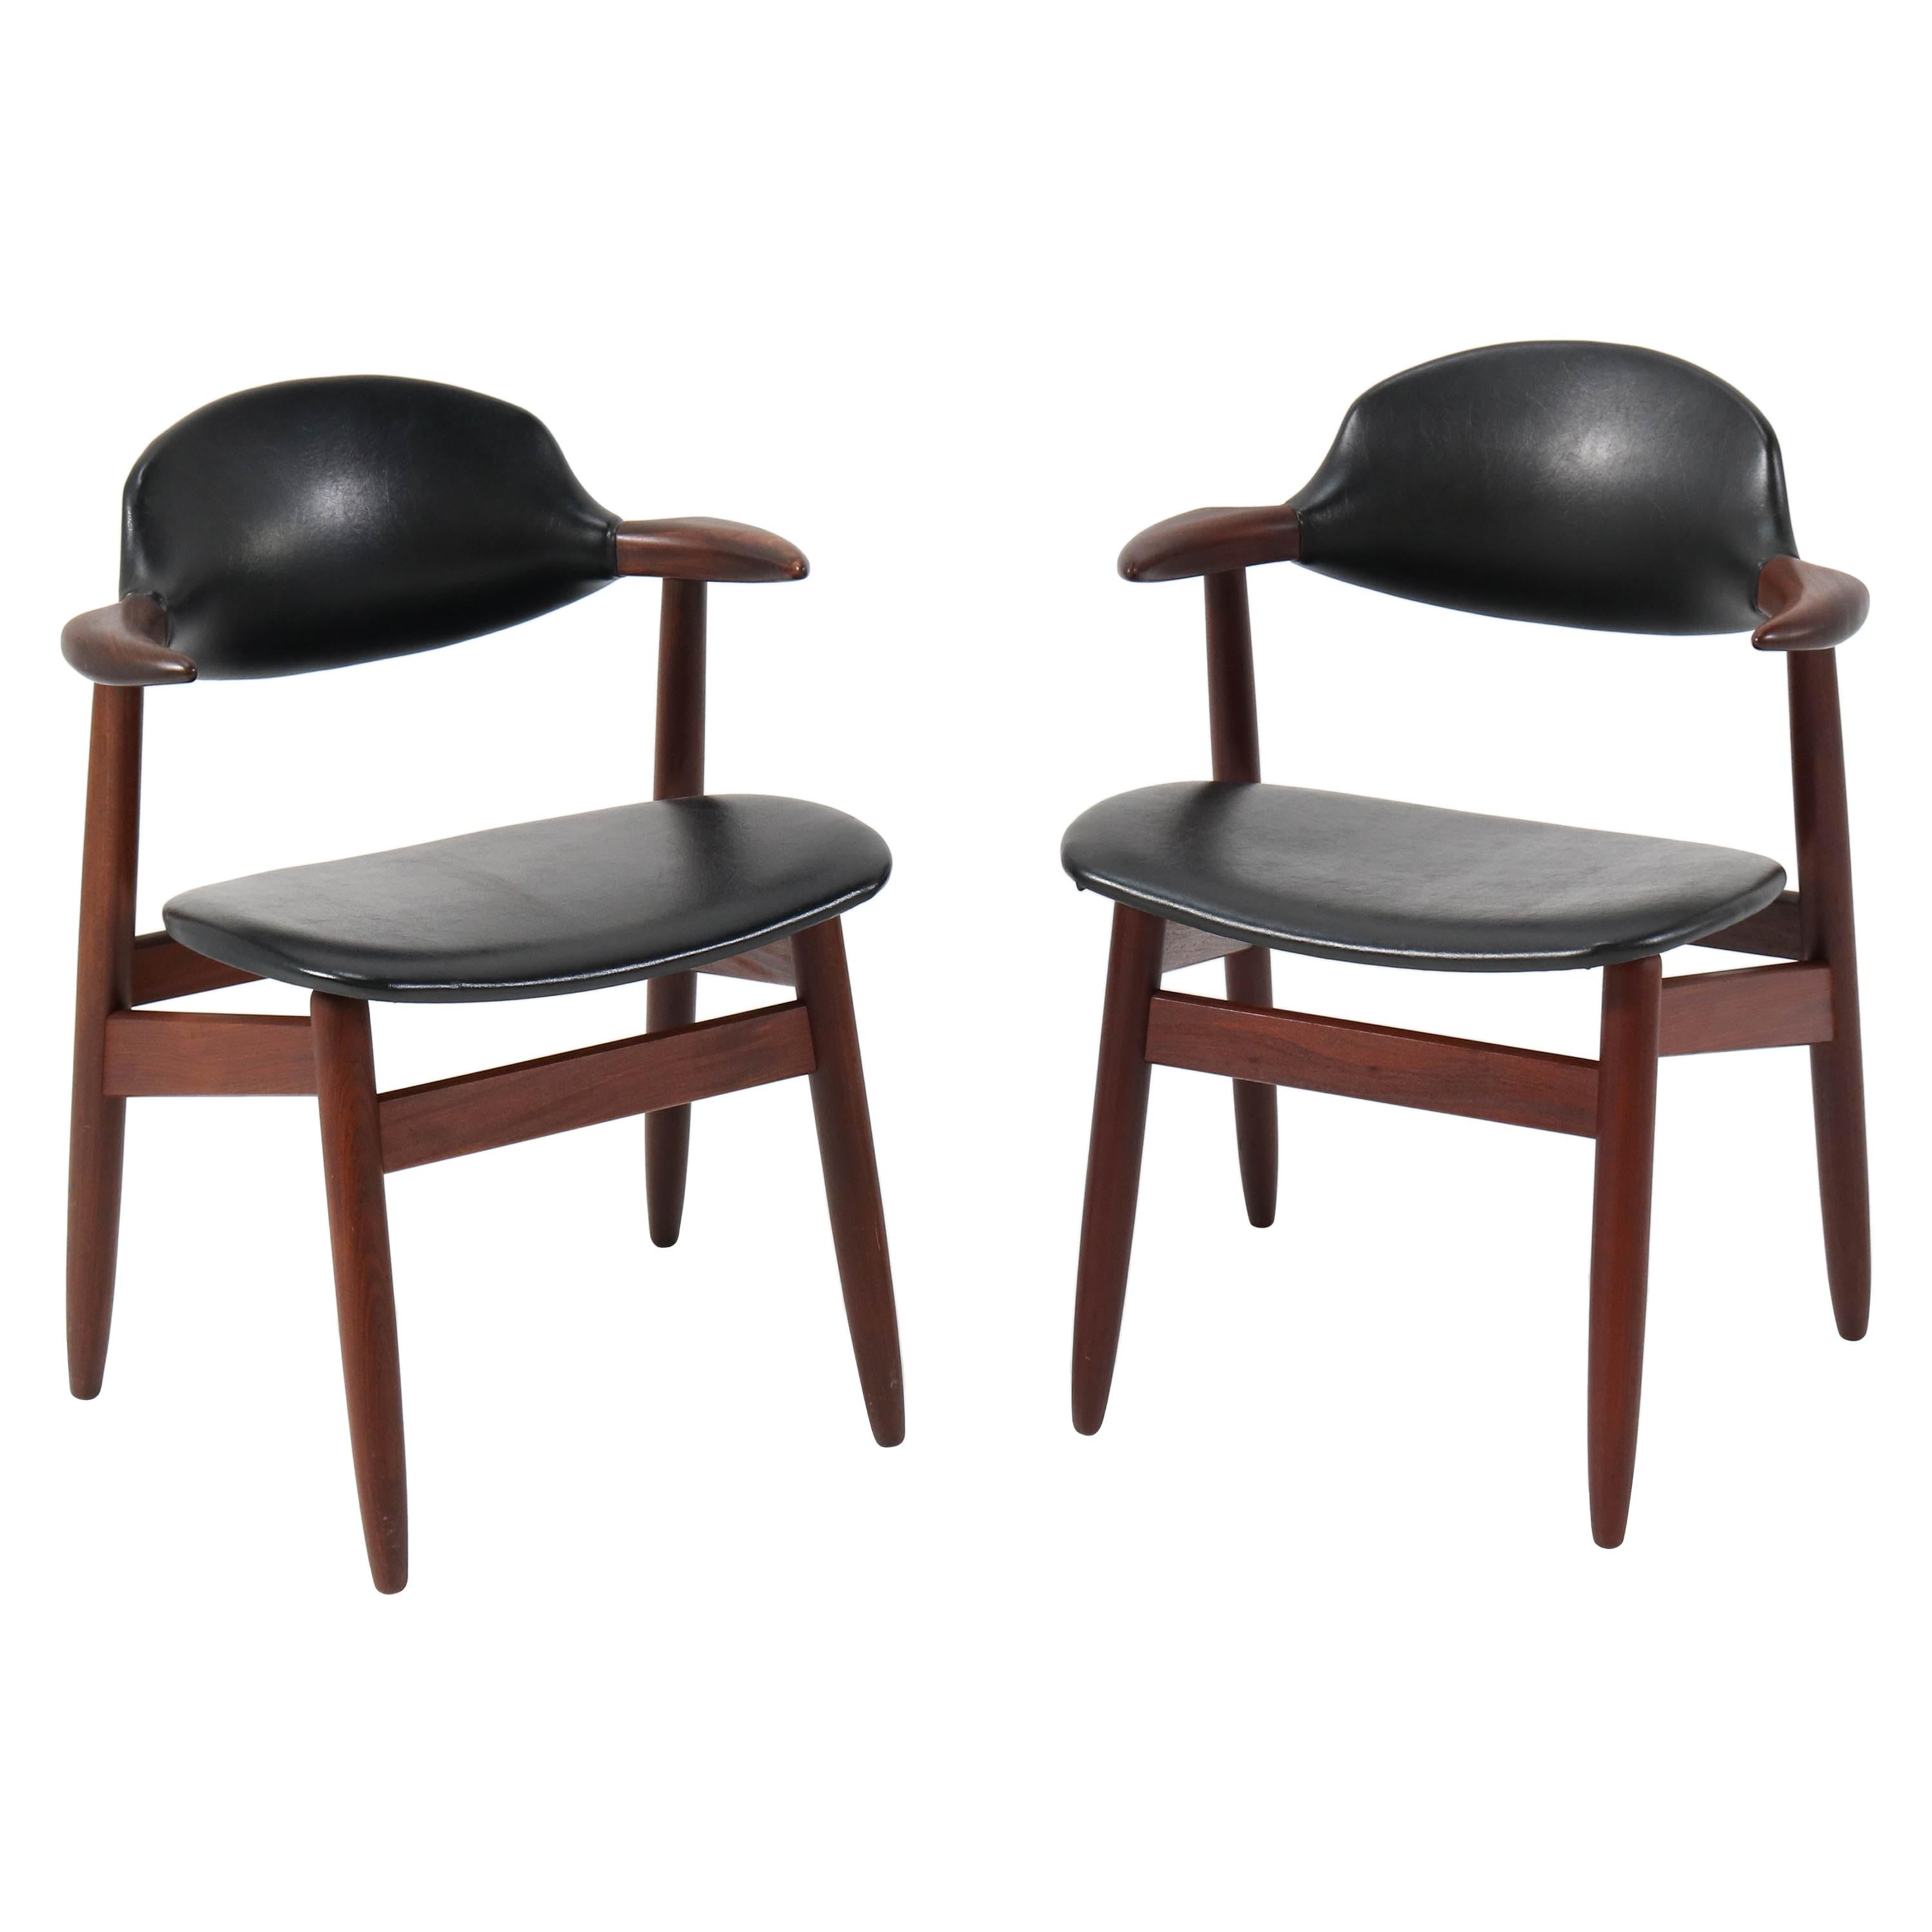 Two Mid-Century Modern Teak Cowhorn Chairs by Tijsseling for Hulmefa, 1960s For Sale